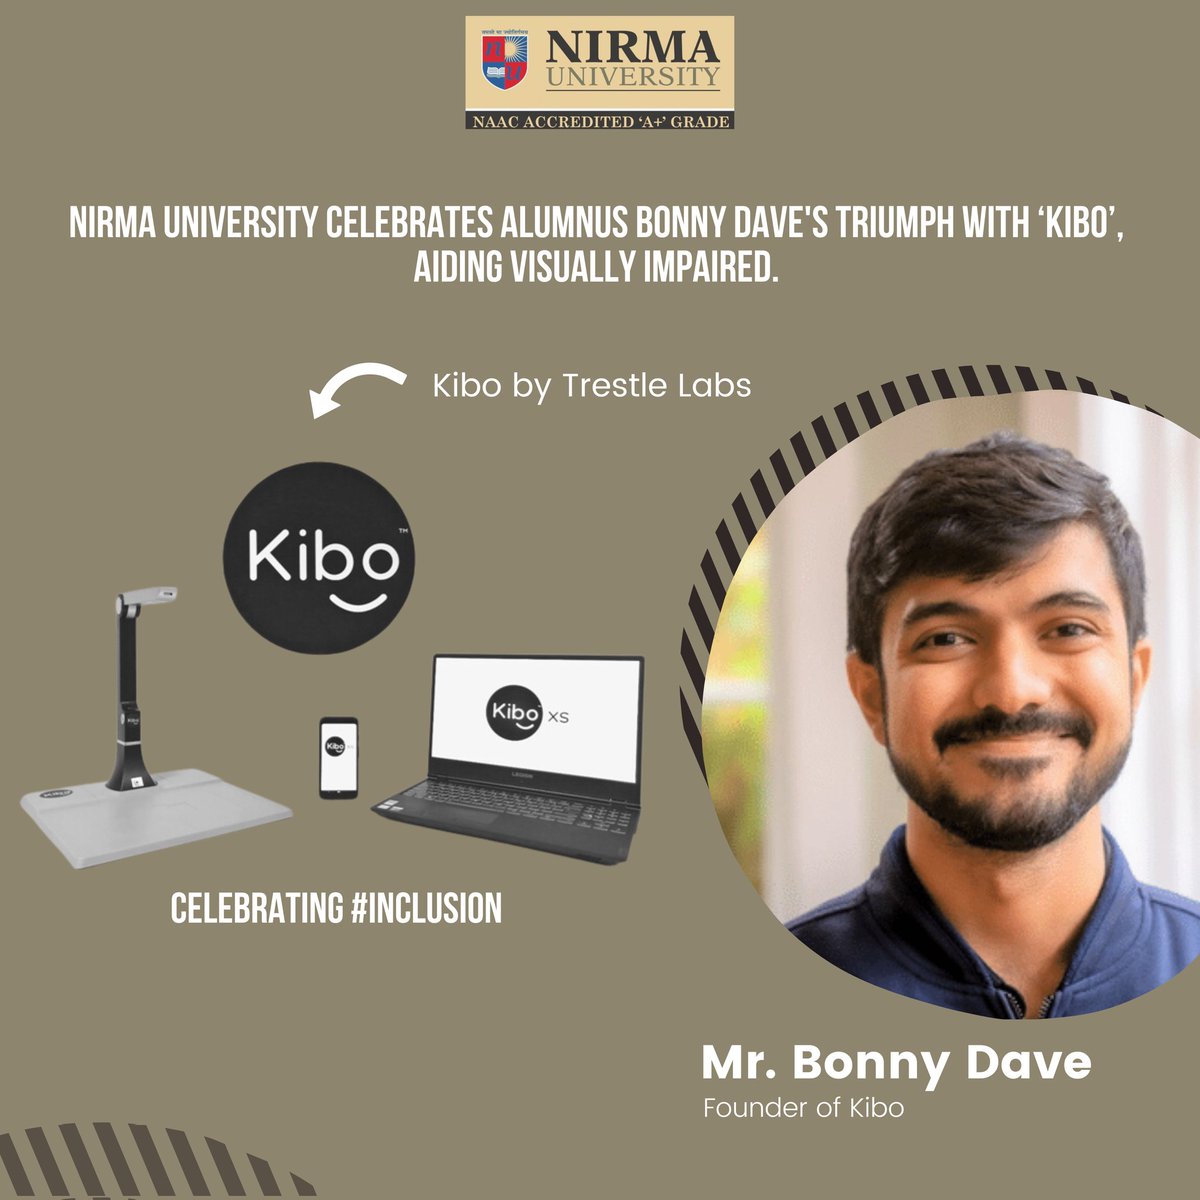 Nirma University is proud on alumnus @BonnyDave09's triumph! Co-founder of Kibo, an AI tool aiding the visually impaired. Partnered with T-Series for 'Srikanth.' Impressive win on Shark Tank India! #NirmaUniversity #Proud #Kibo #Srikanth #SharkTankIndia #RajkumarRao #NirmaUni